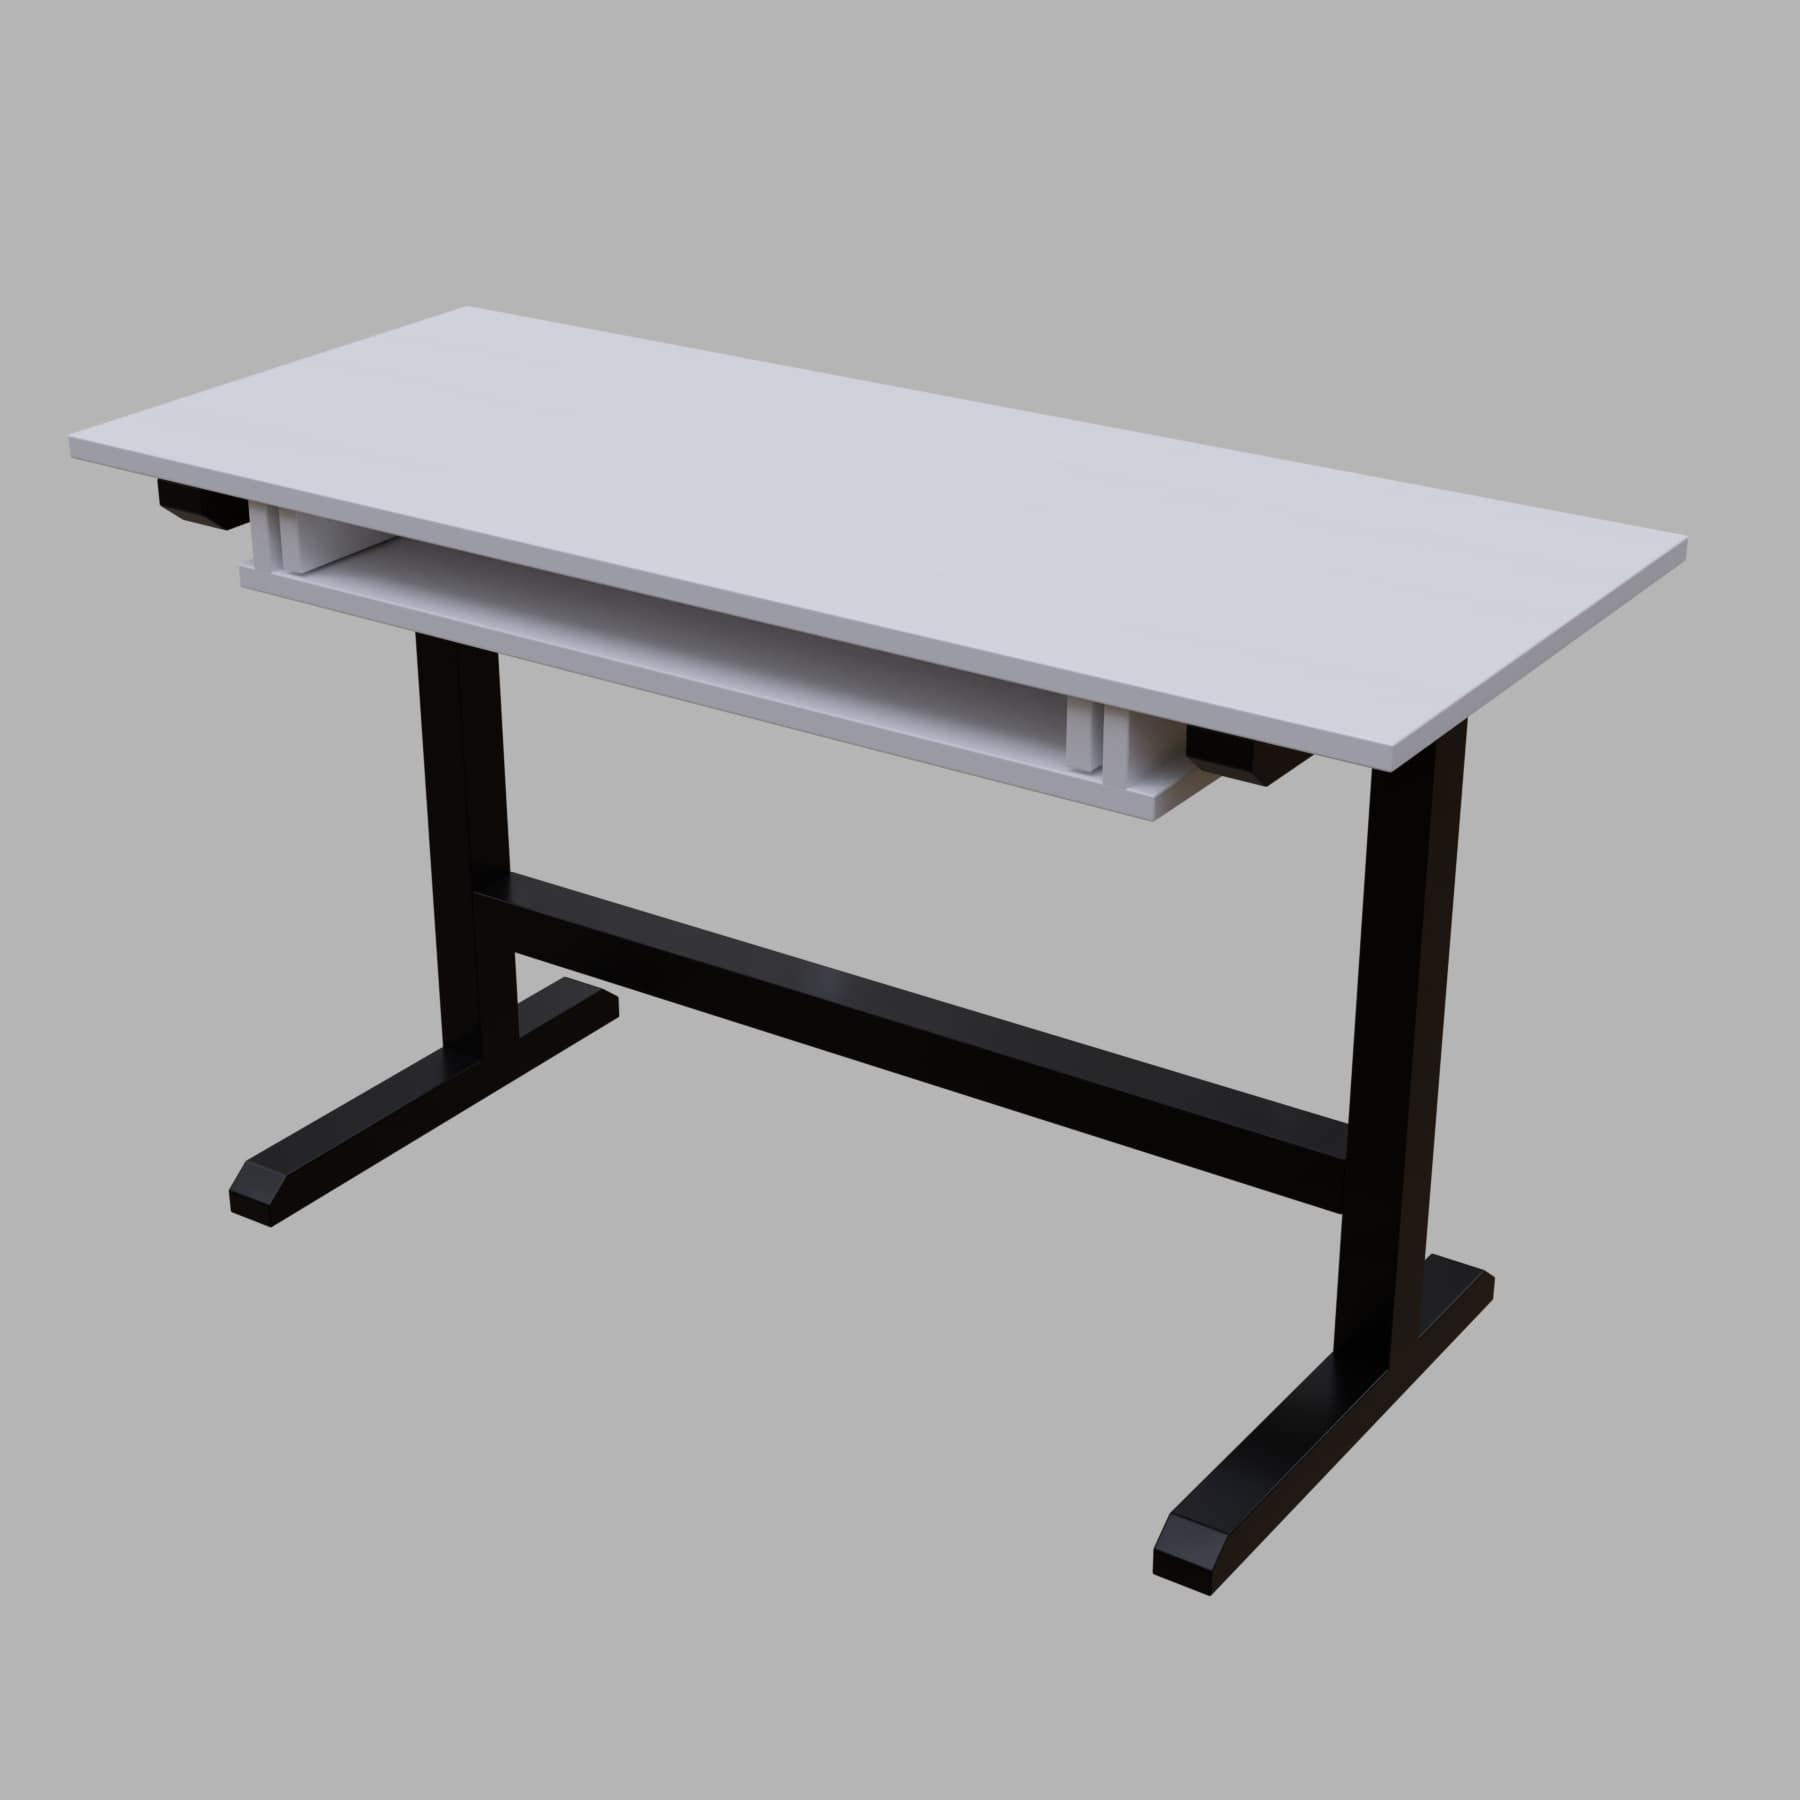 Zinnia Study Table with Keyboard Tray in White Color